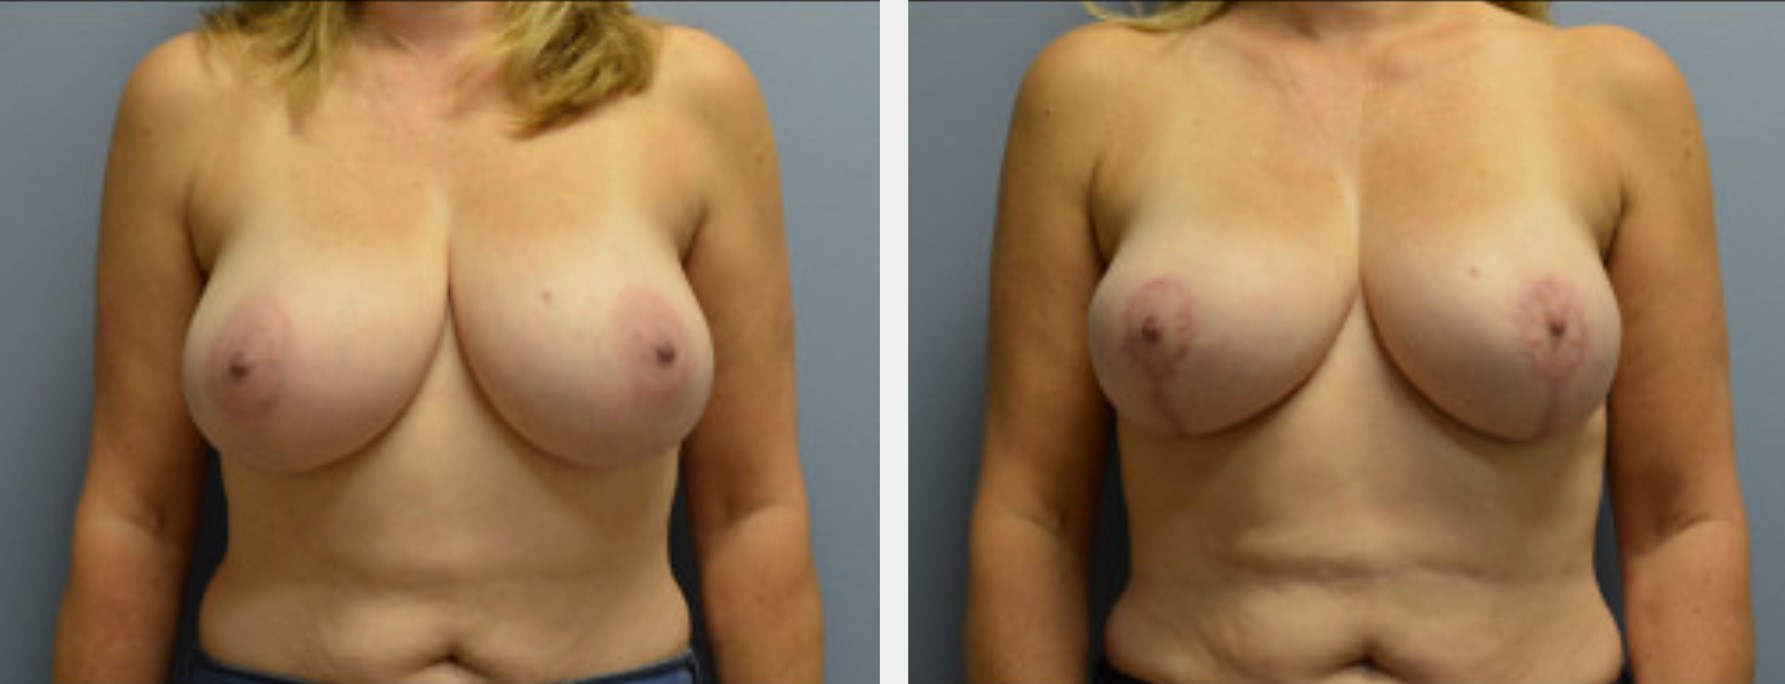 breast reduction 1